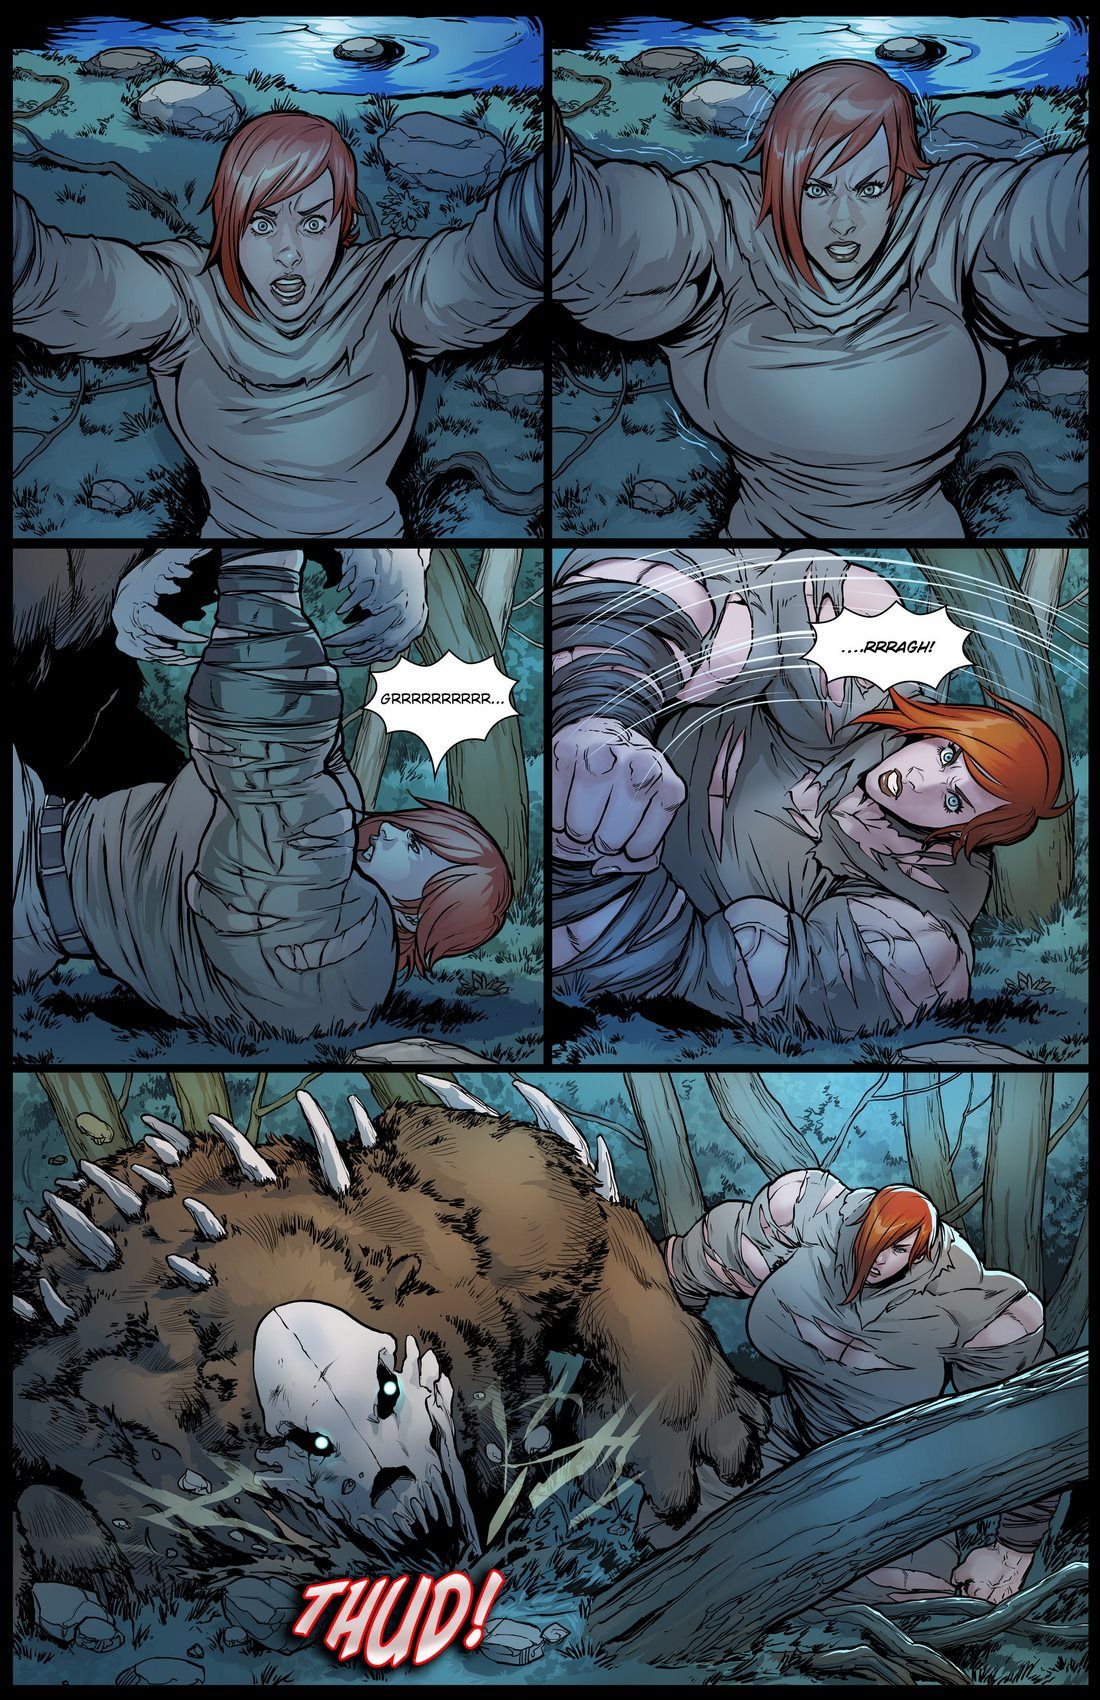 The Strong Shall Survive Issue 02 MuscleFan page 6